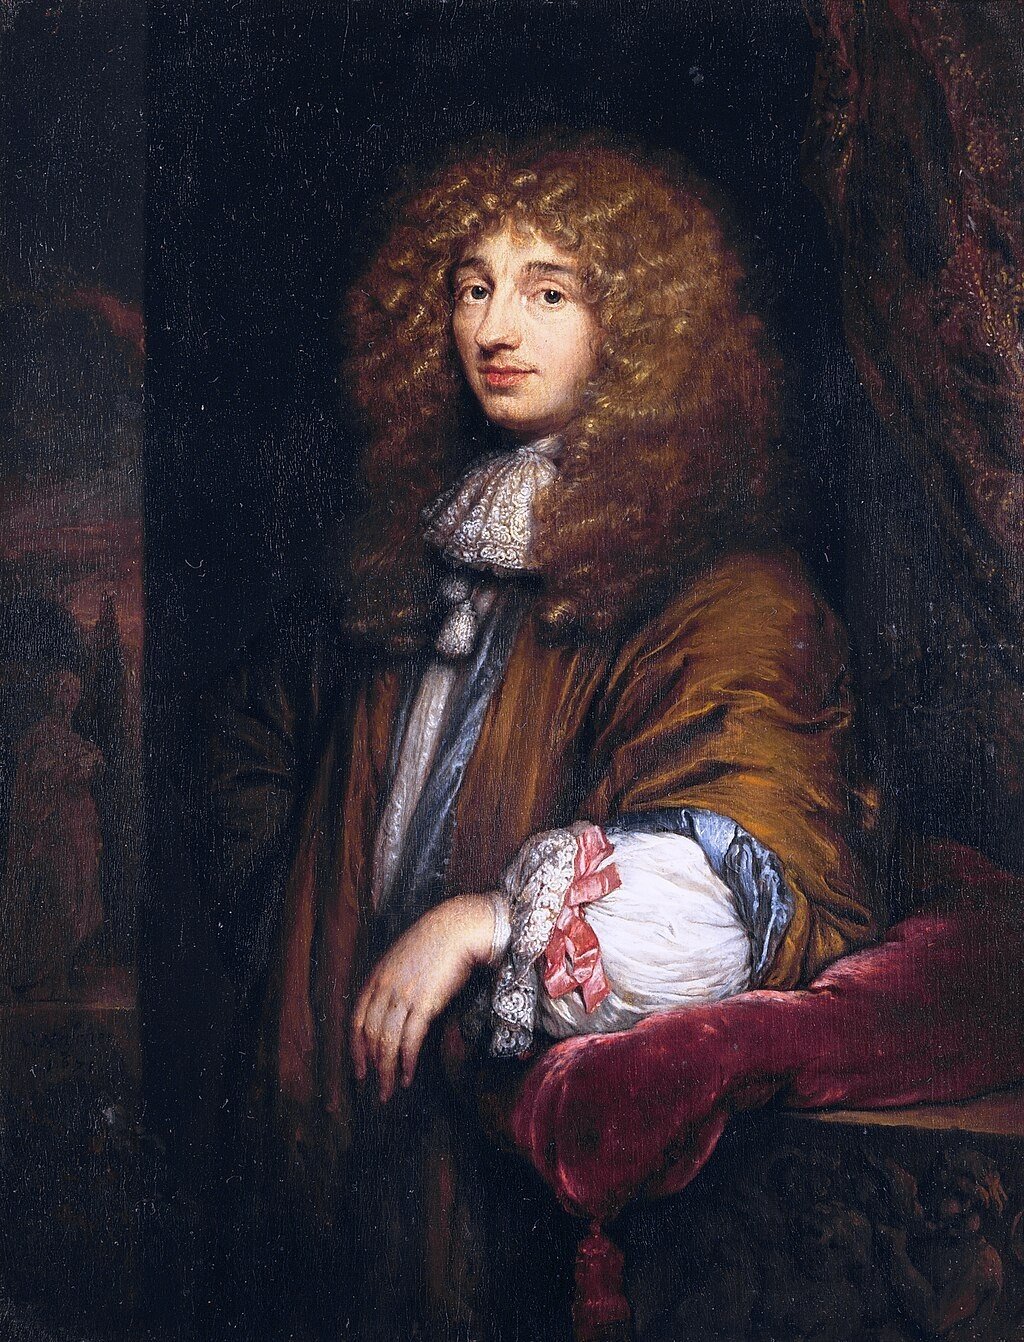 Painted portrait of Christiaan Huygens. Huygen, who has shoulder-length, blonde, curly hair looks blankly at the viewer. Huygen is wearing 1600s era attire with a neckerchief and a brown robe over white, puffy sleeves, Huygen leans on the left arm which is resting on a red velvet pillow. 